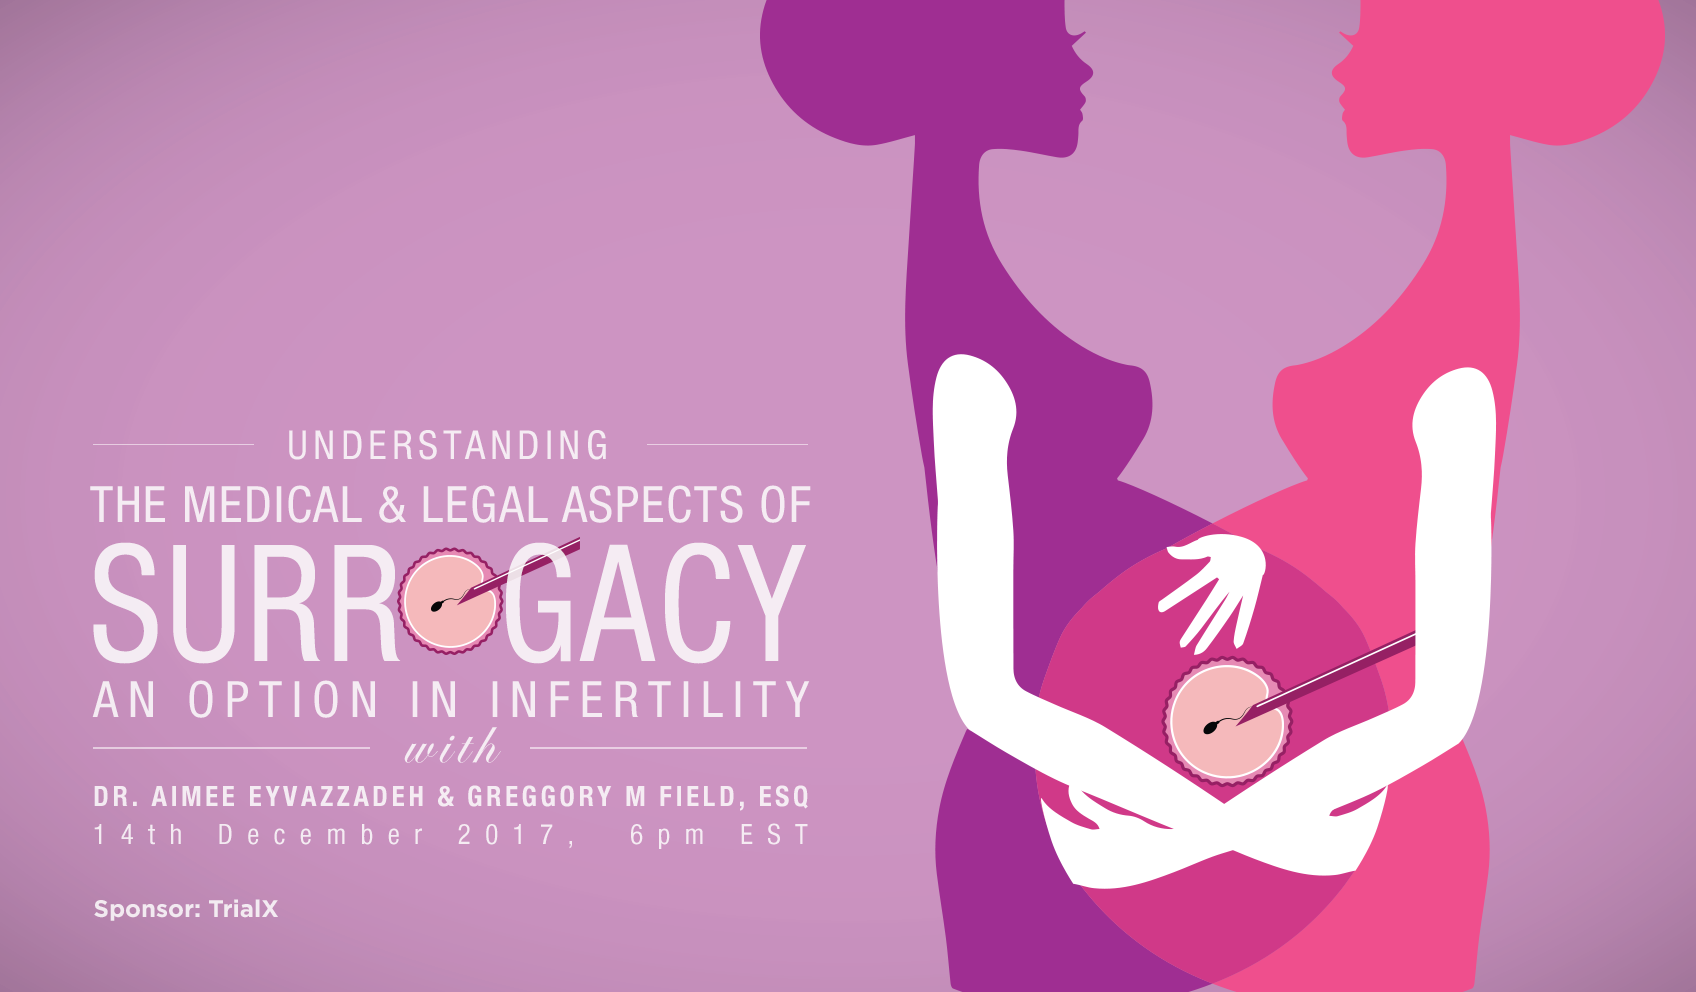 Understanding the Medical and Legal Aspects of Surrogacy – An Option in Infertility